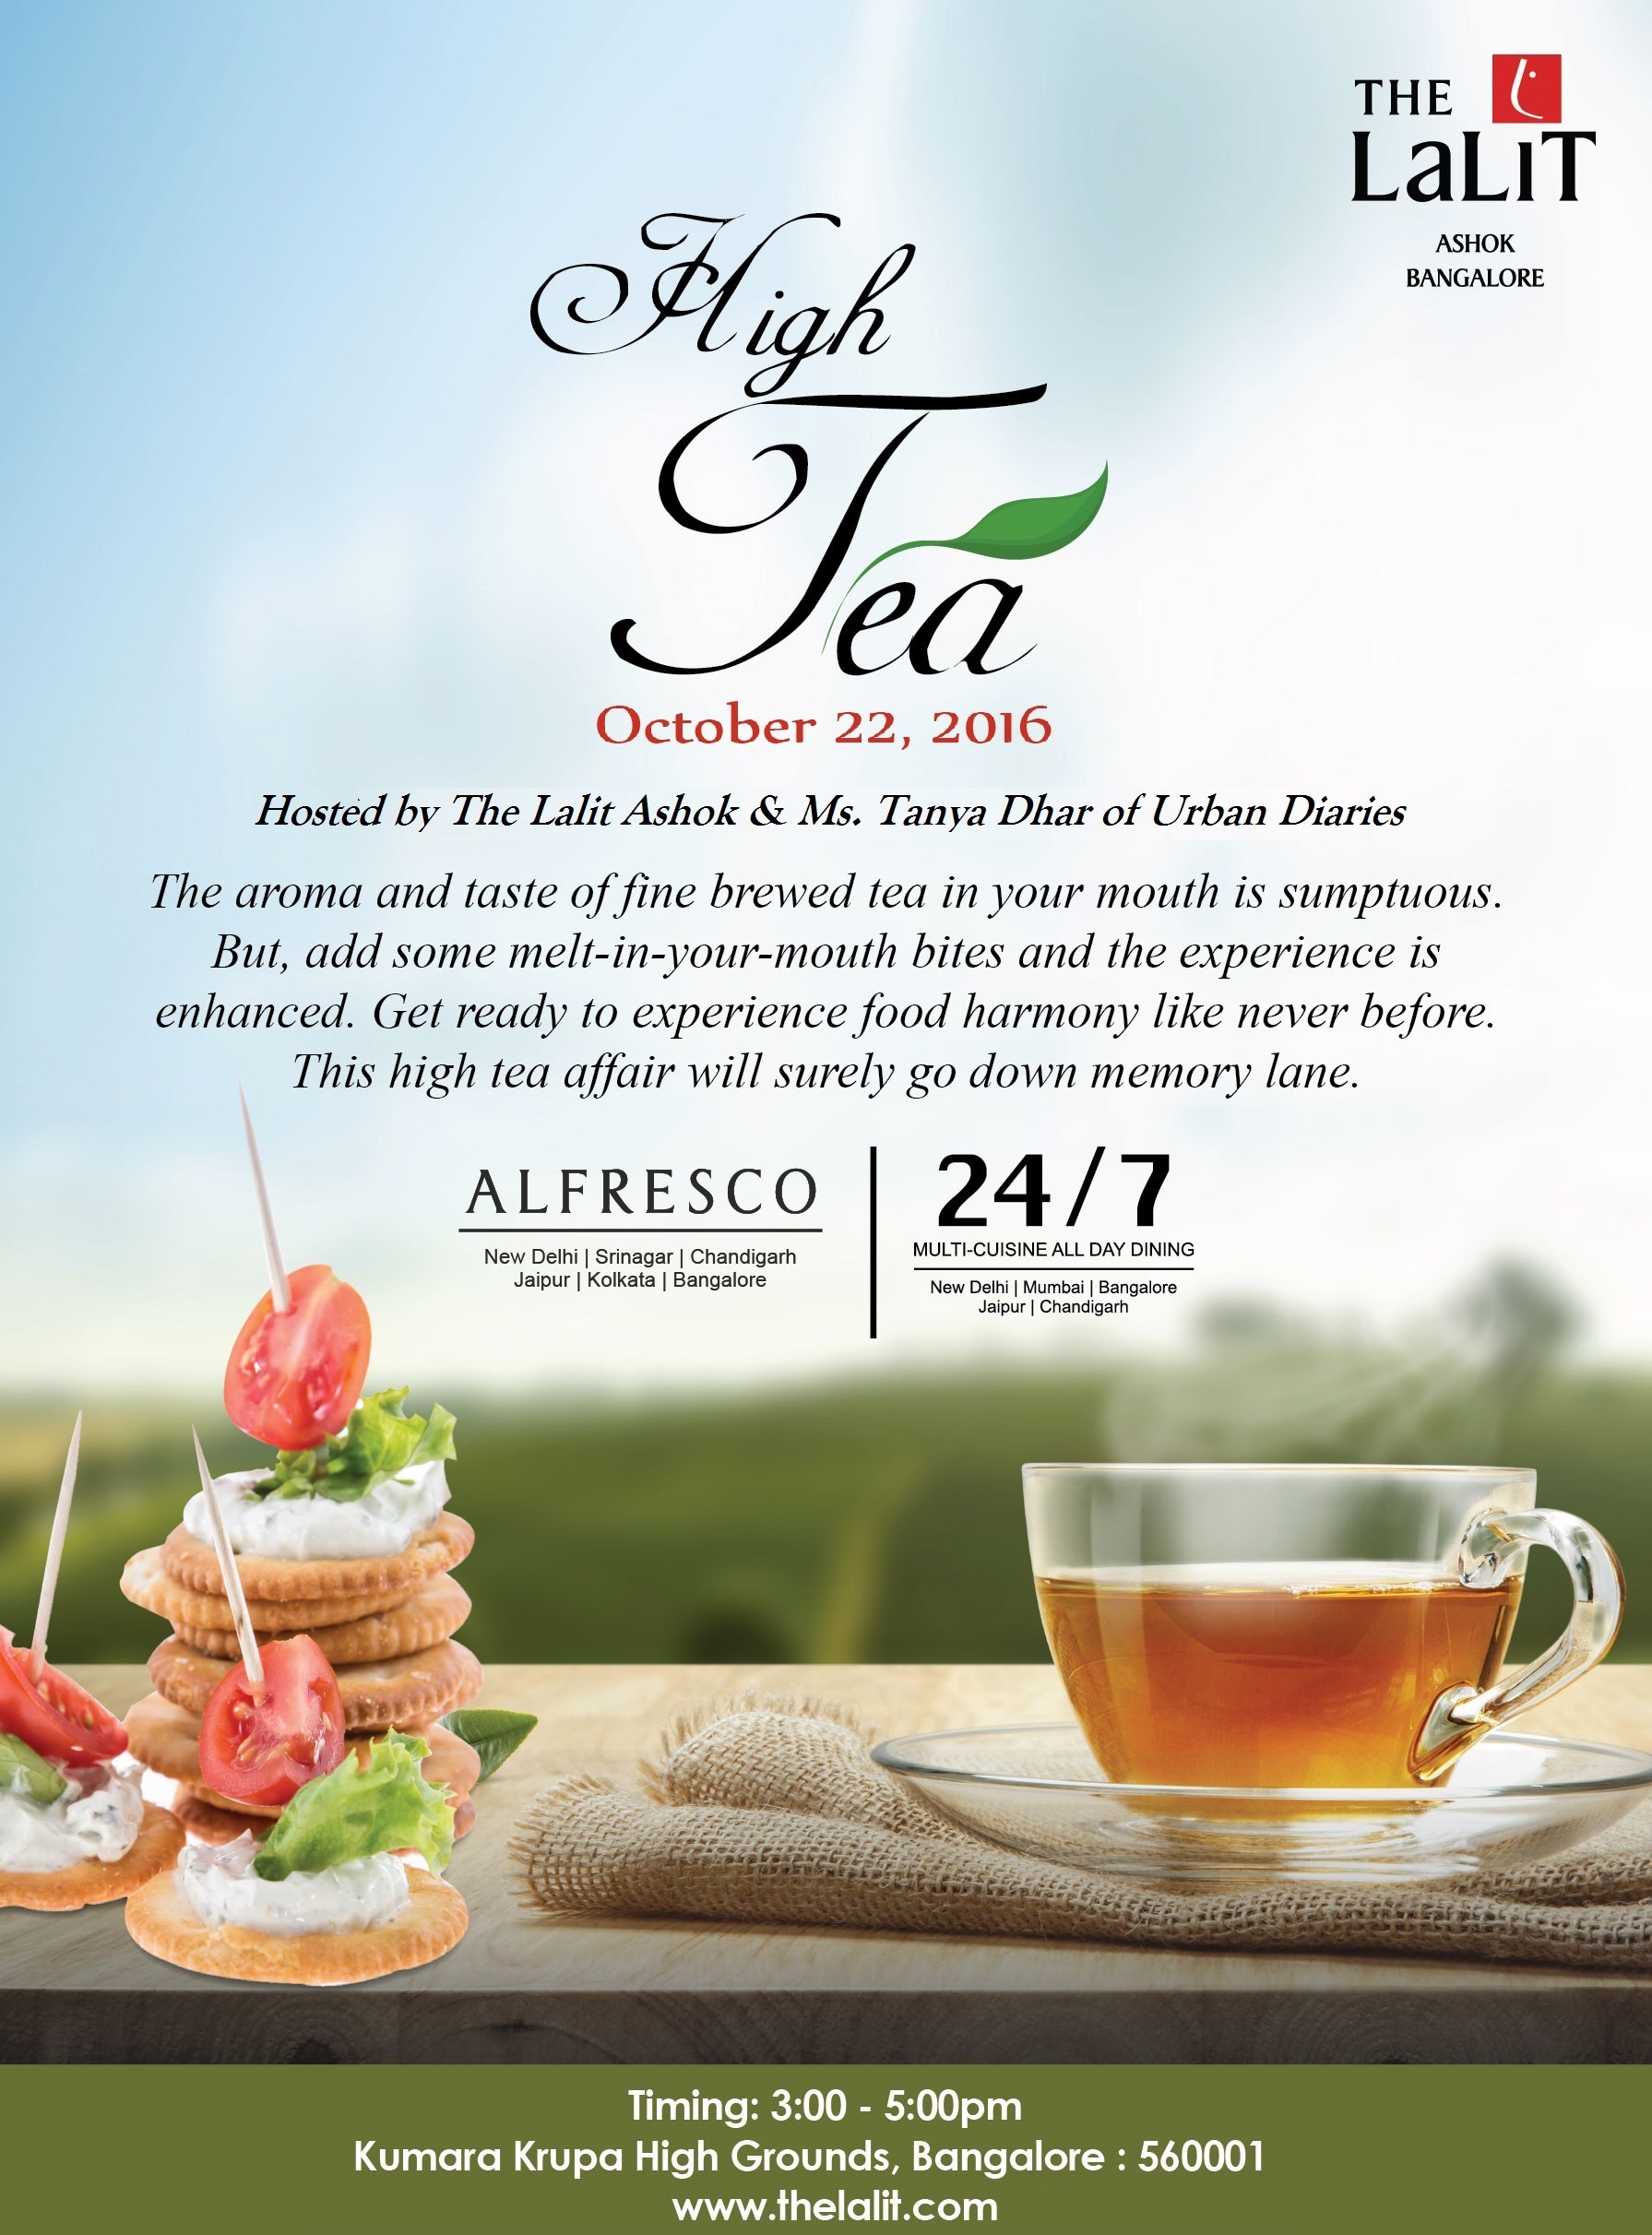 The Tradition of Afternoon Tea at the Lalit Ashok, Bangalore